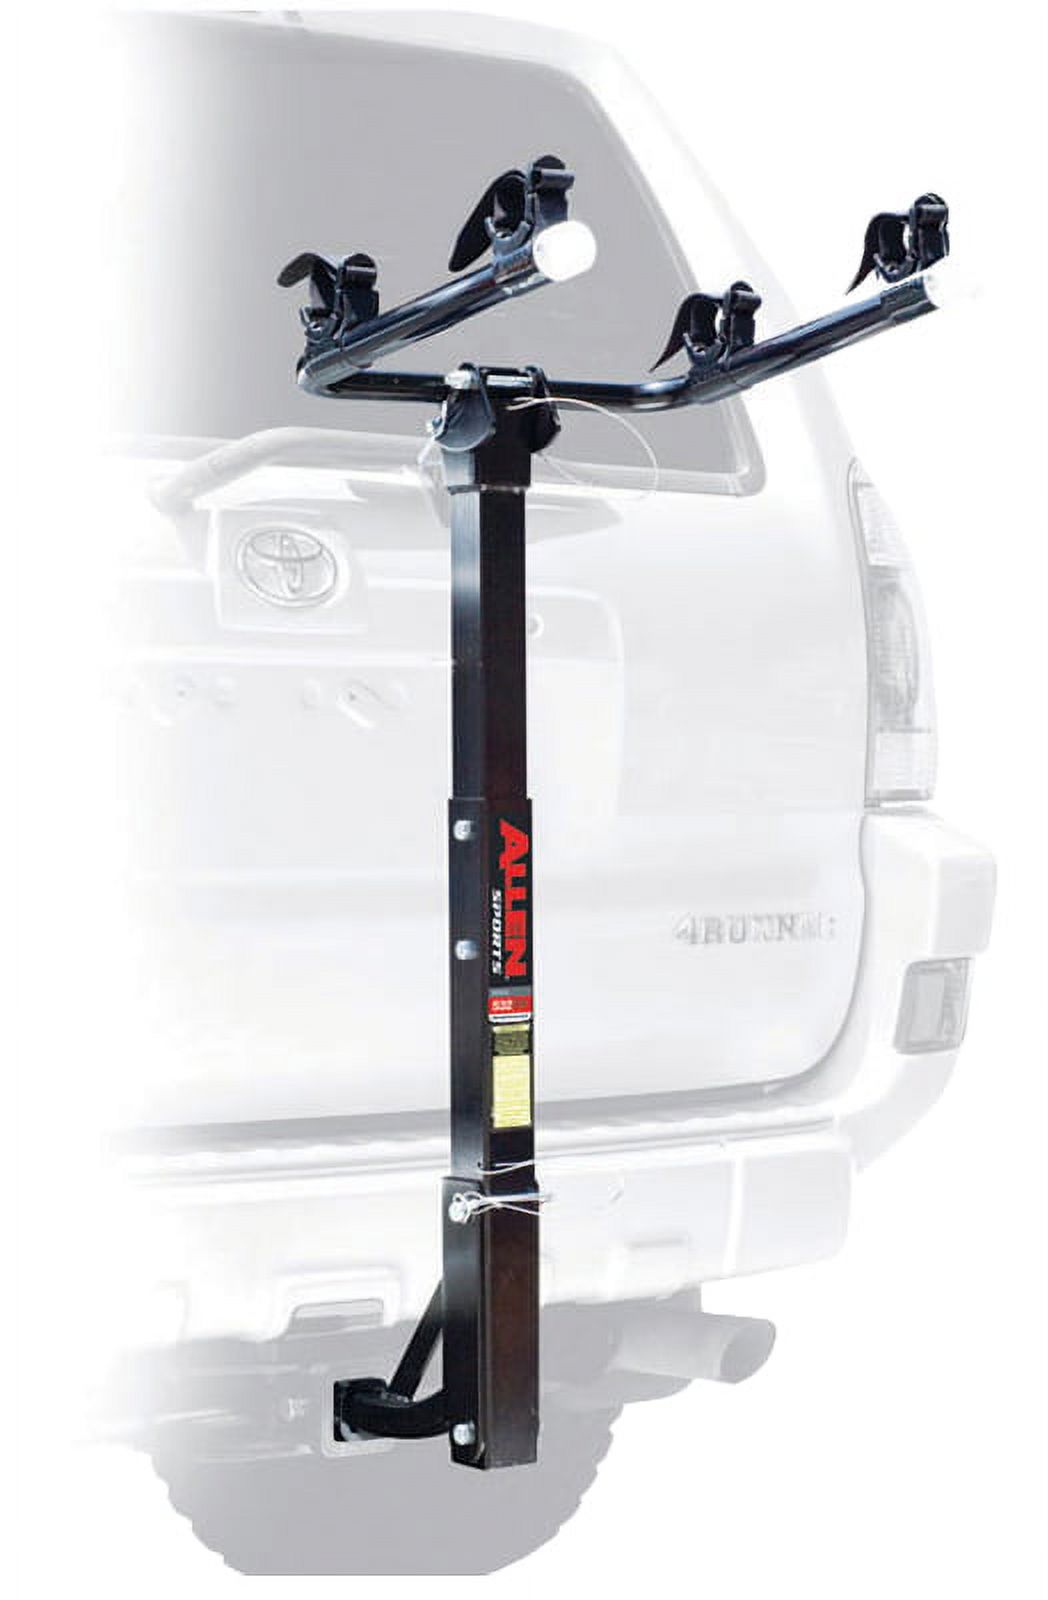 Allen Sports 522RR Deluxe Hitch Mounted 2-Bike Carrier for 1 1/4" and 2" Receiver Hitches - image 3 of 3